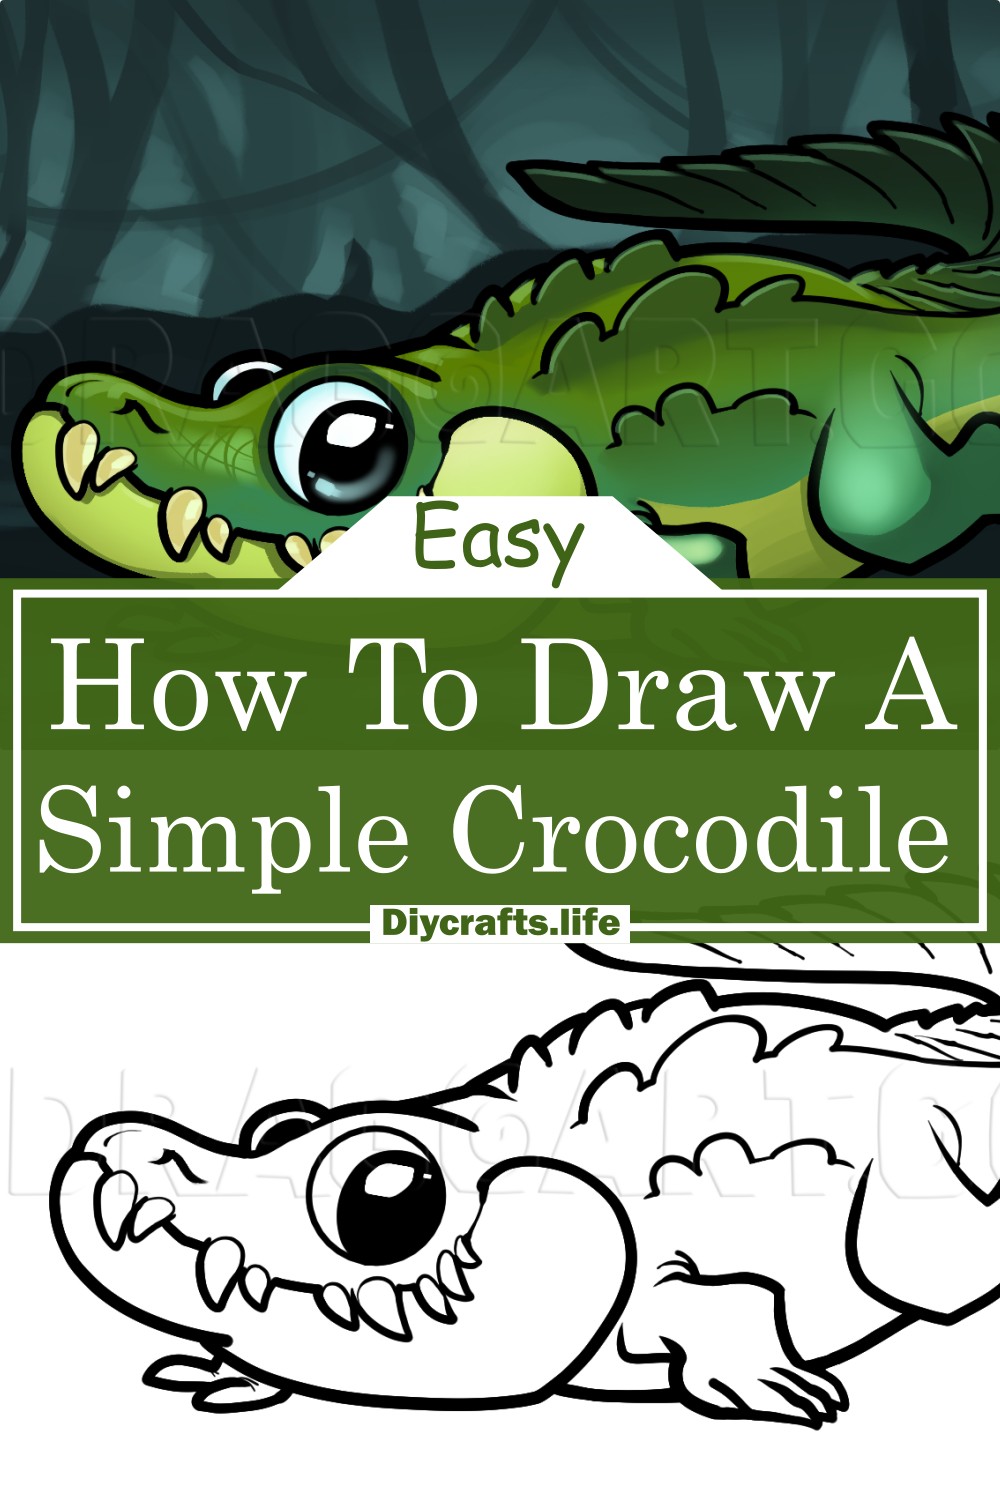 How To Draw A Simple Crocodile